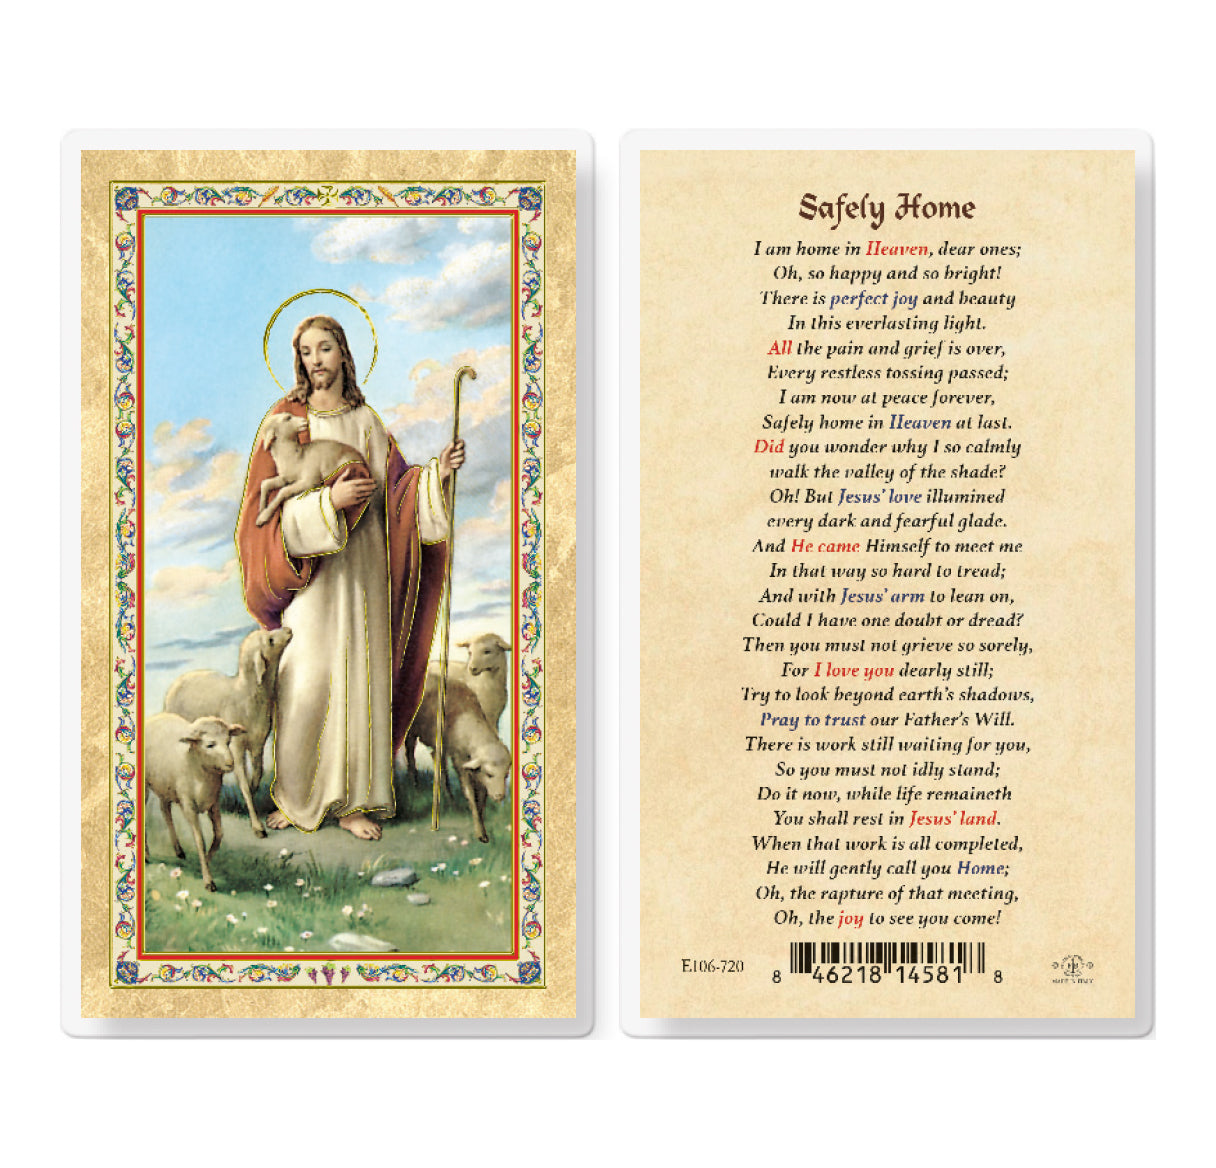 Safely Home - Good Shepherd Gold-Stamped Laminated Catholic Prayer Holy Card with Prayer on Back, Pack of 25